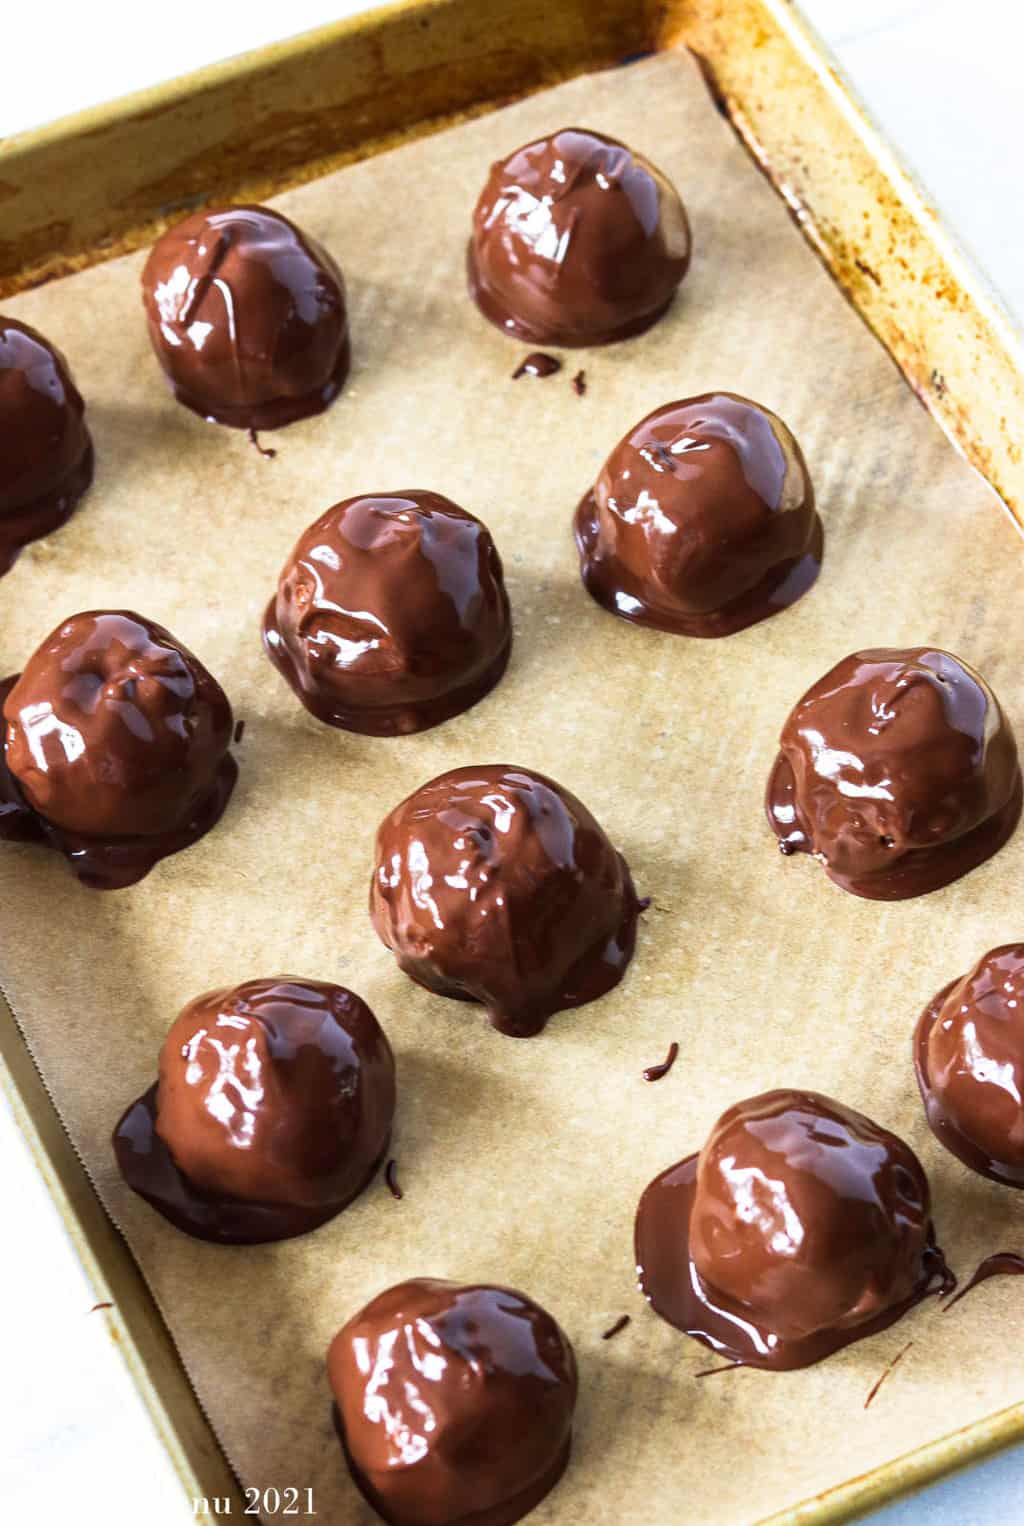 A sie angled shot of peanut butter bon bons glazed in chocolate